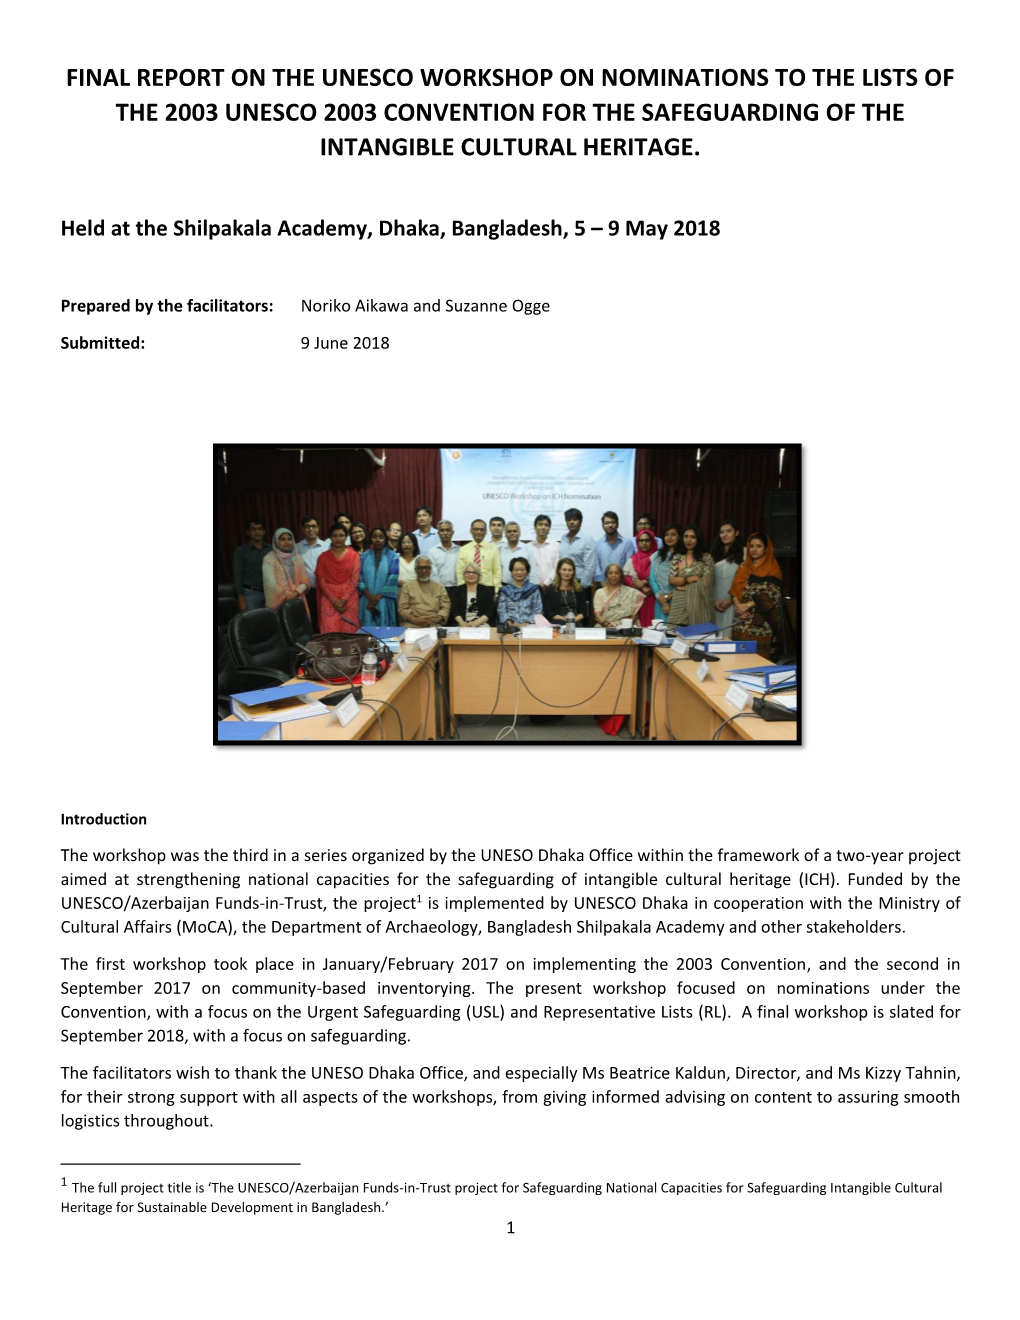 Final Report on the Unesco Workshop on Nominations to the Lists of the 2003 Unesco 2003 Convention for the Safeguarding of the Intangible Cultural Heritage